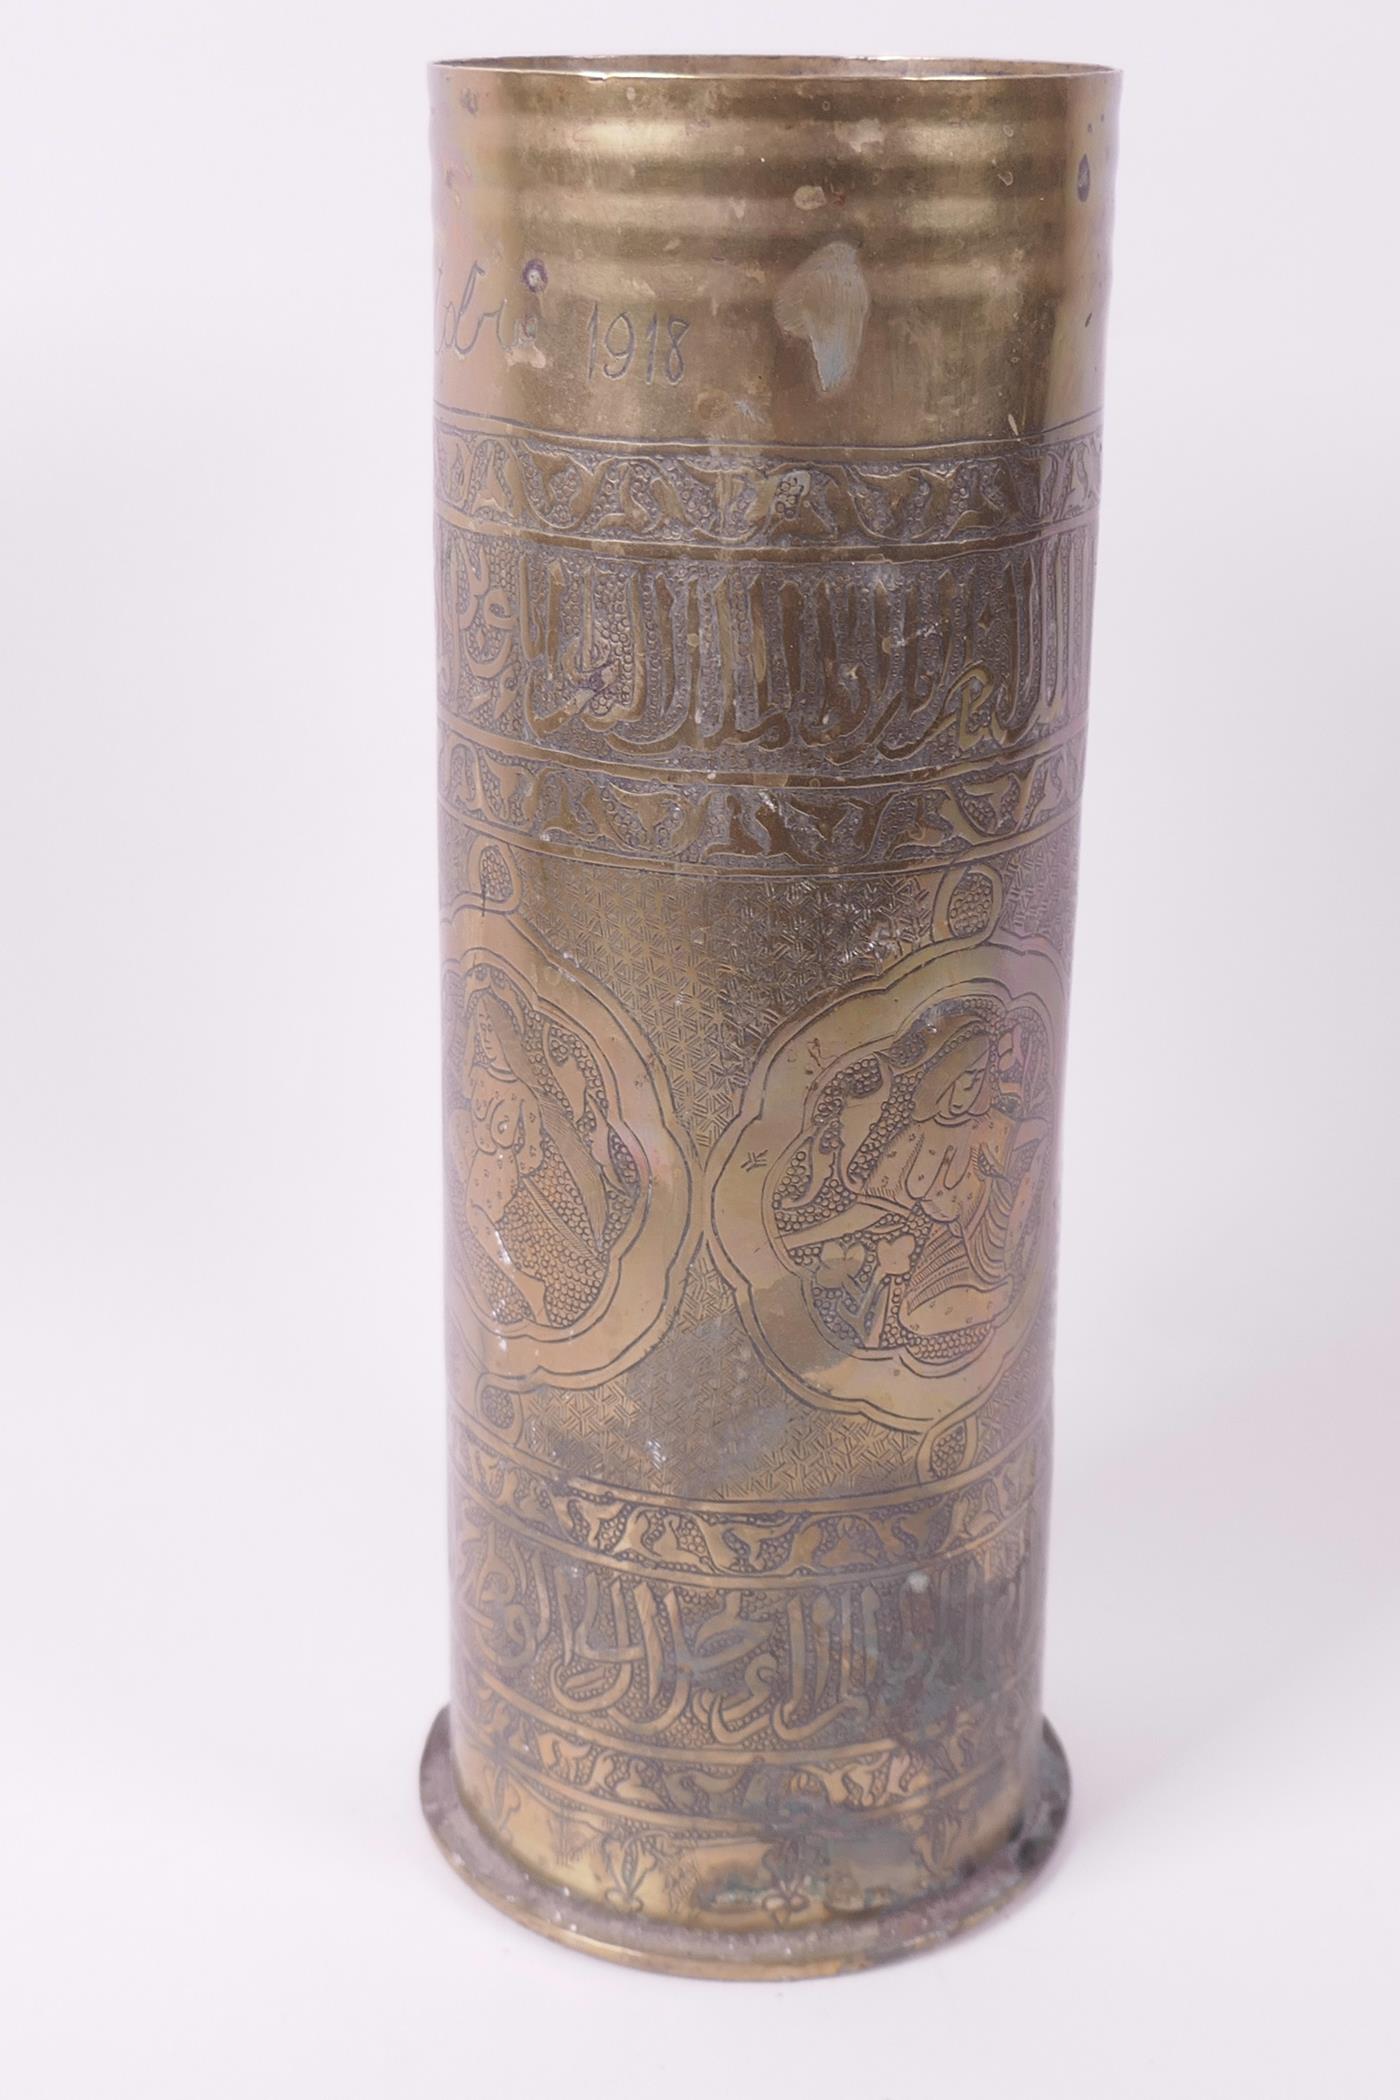 Trench Art, a brass shell case engraved with panels of figures, Persian patterns and script,